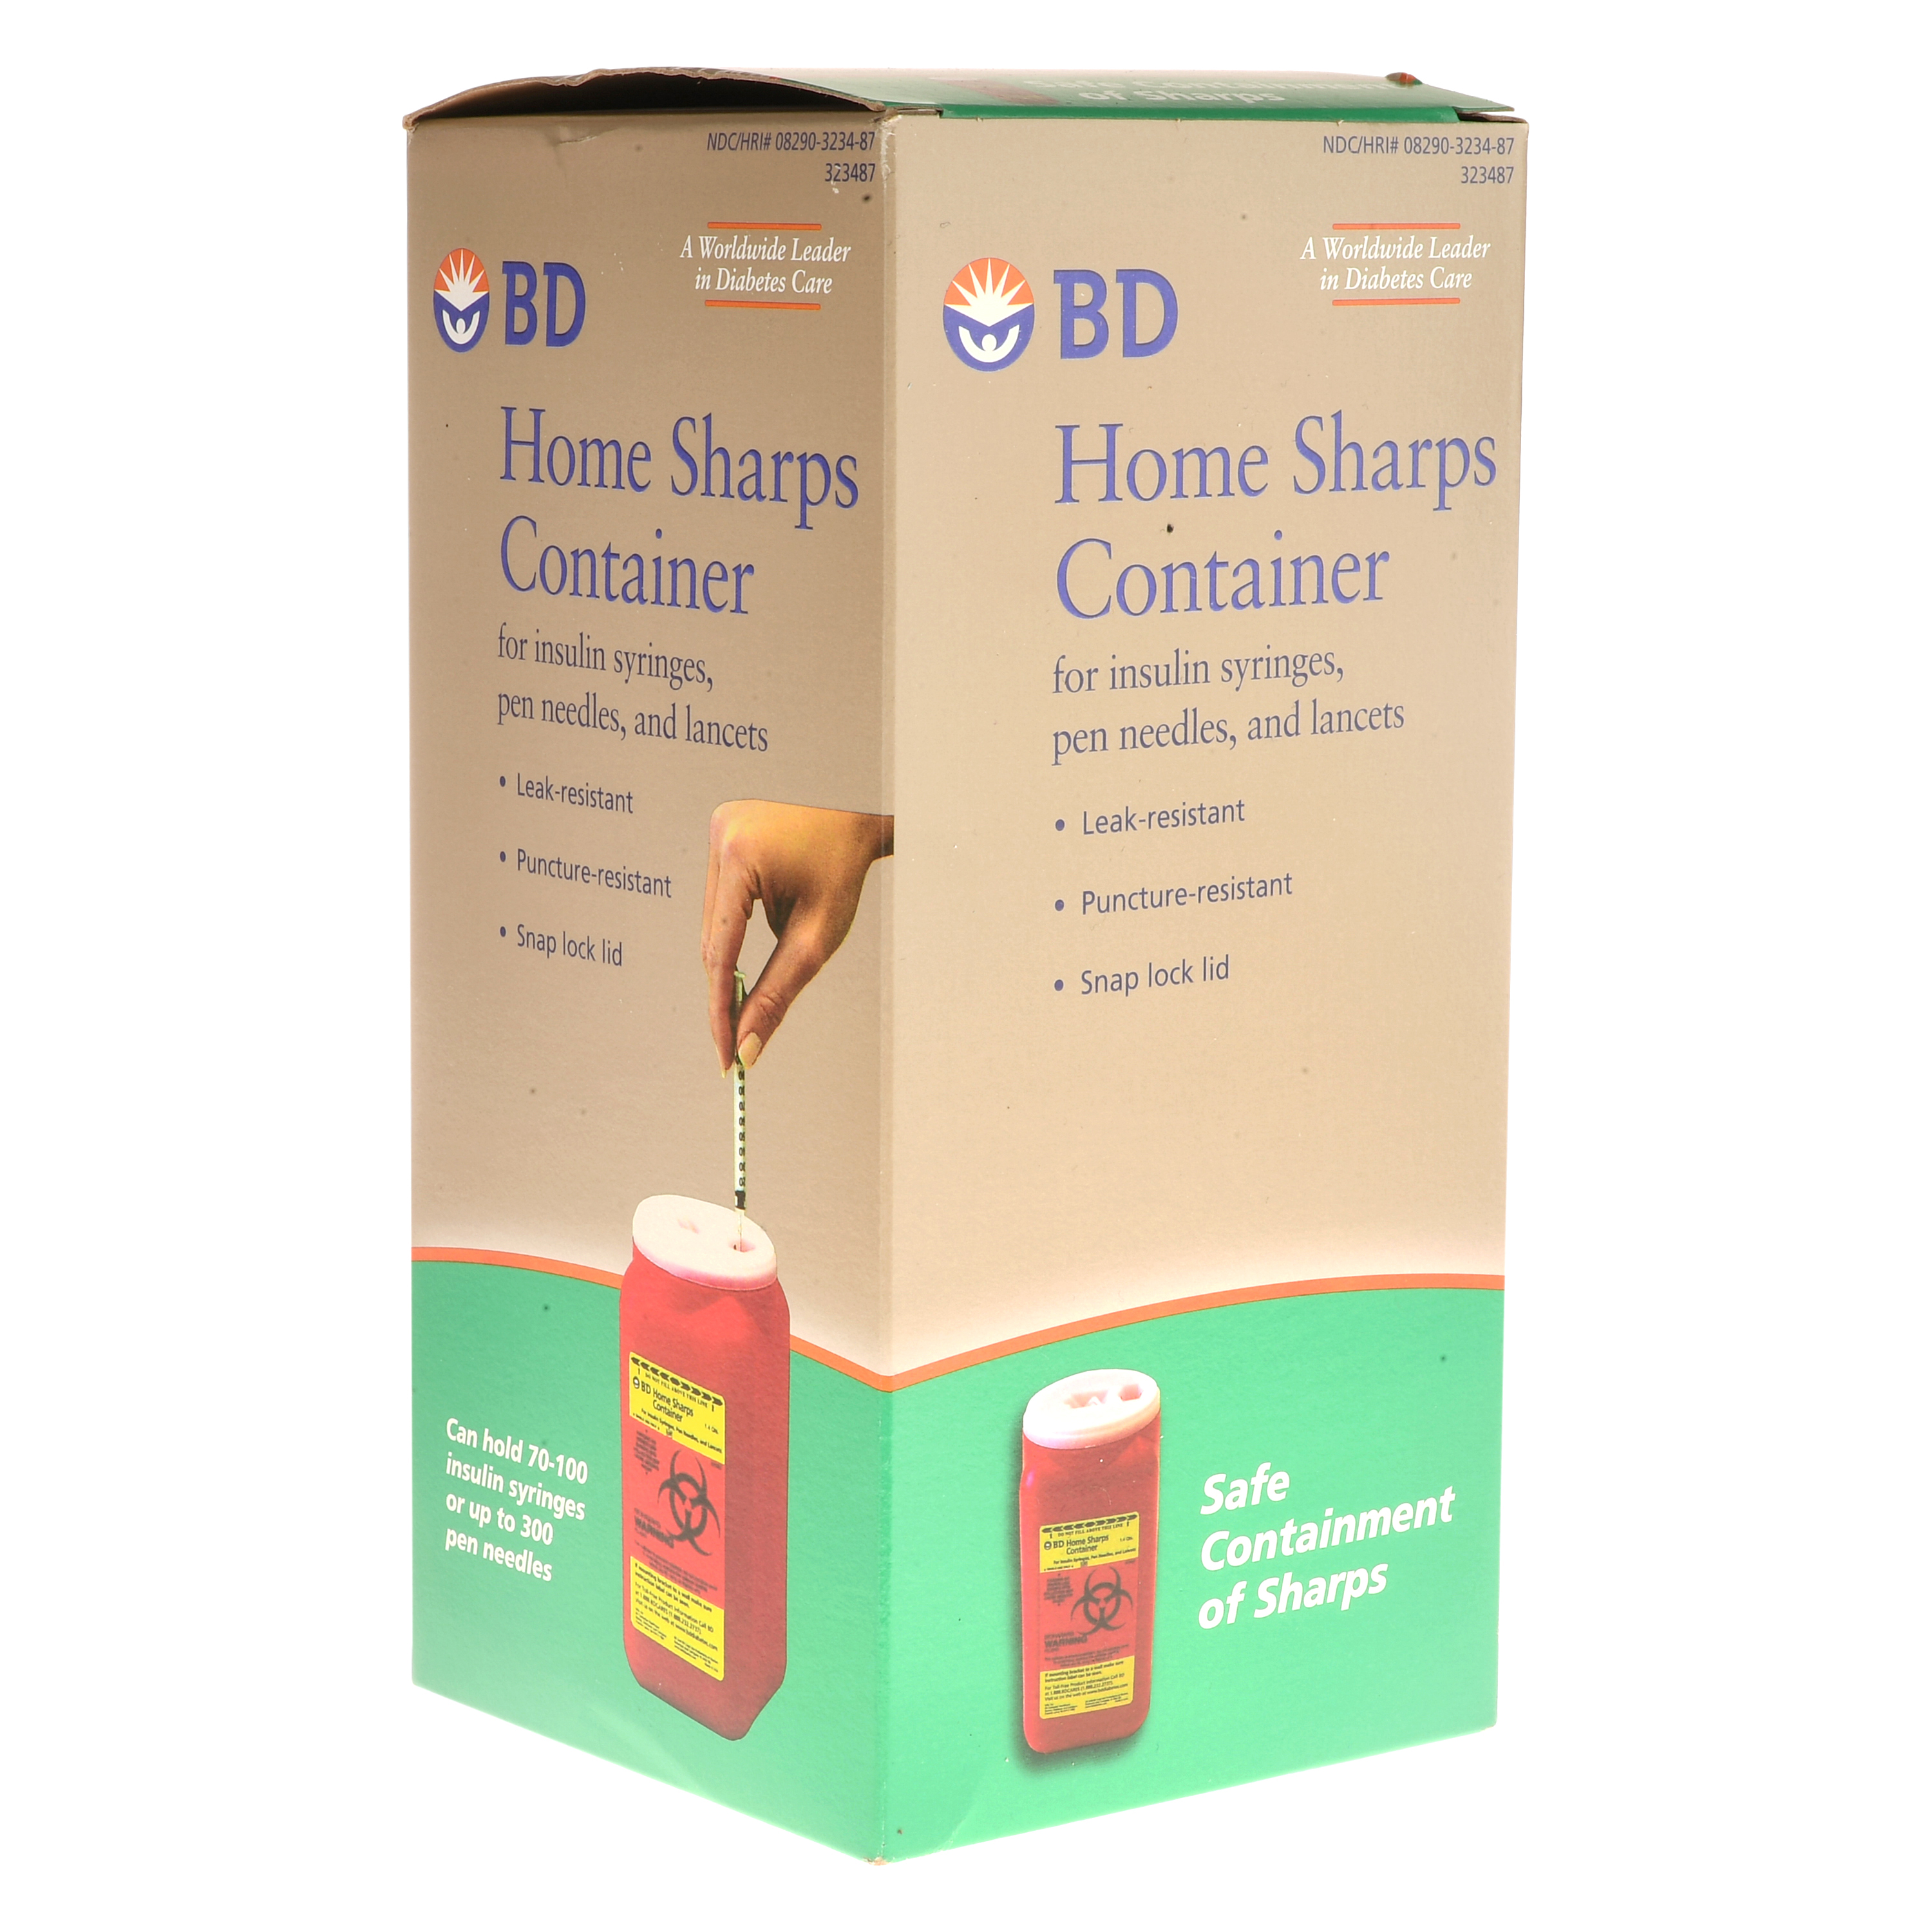 BD Home Sharps Container - image 2 of 5